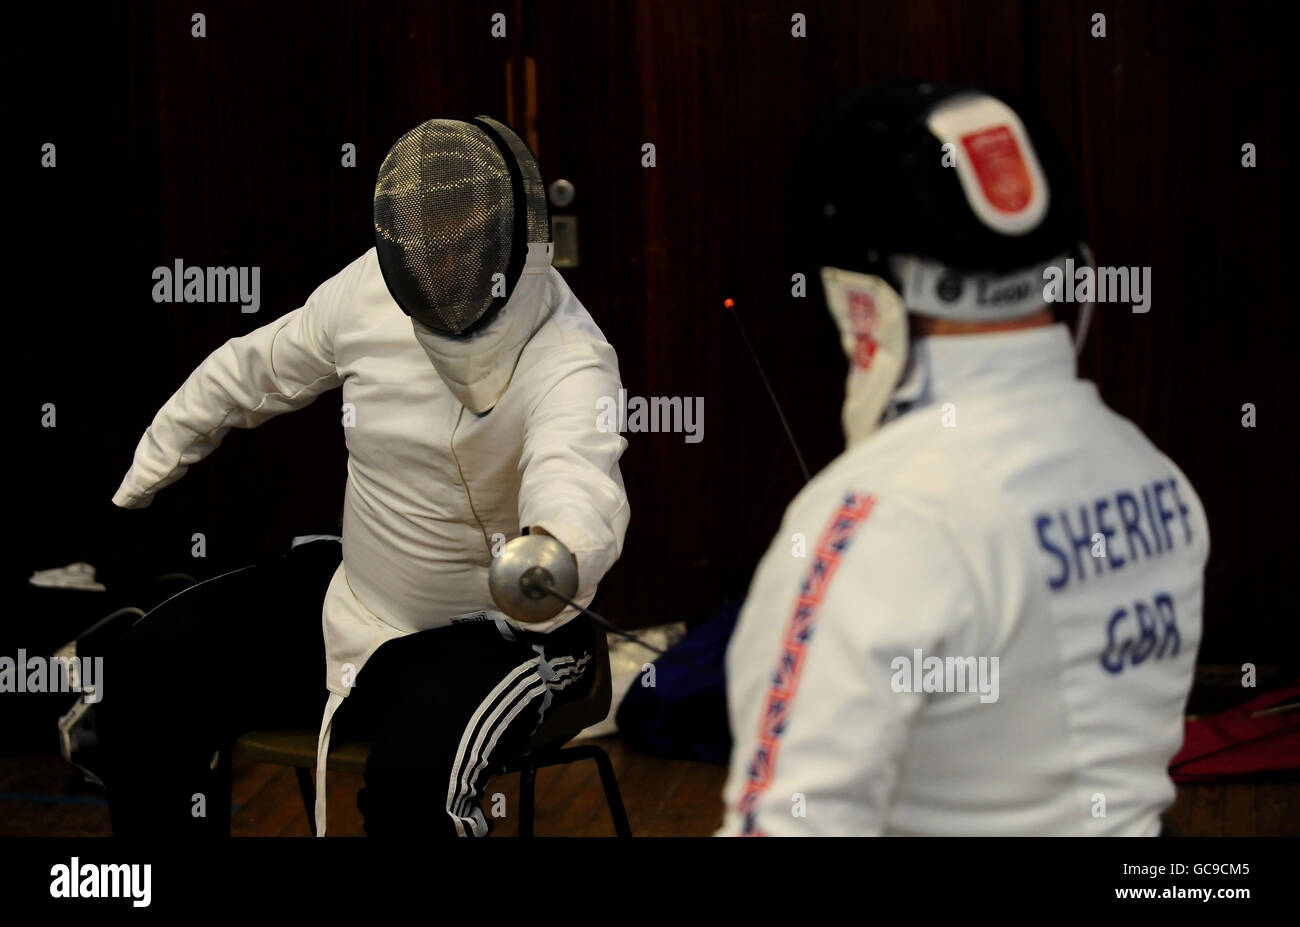 Press Association Journalist Alex Brooker (left) takes part in the Fencing event of the ParalympicsGB London 2012 talent assessment day at the Munrow Sports Centre at the University of Birmingham. Stock Photo